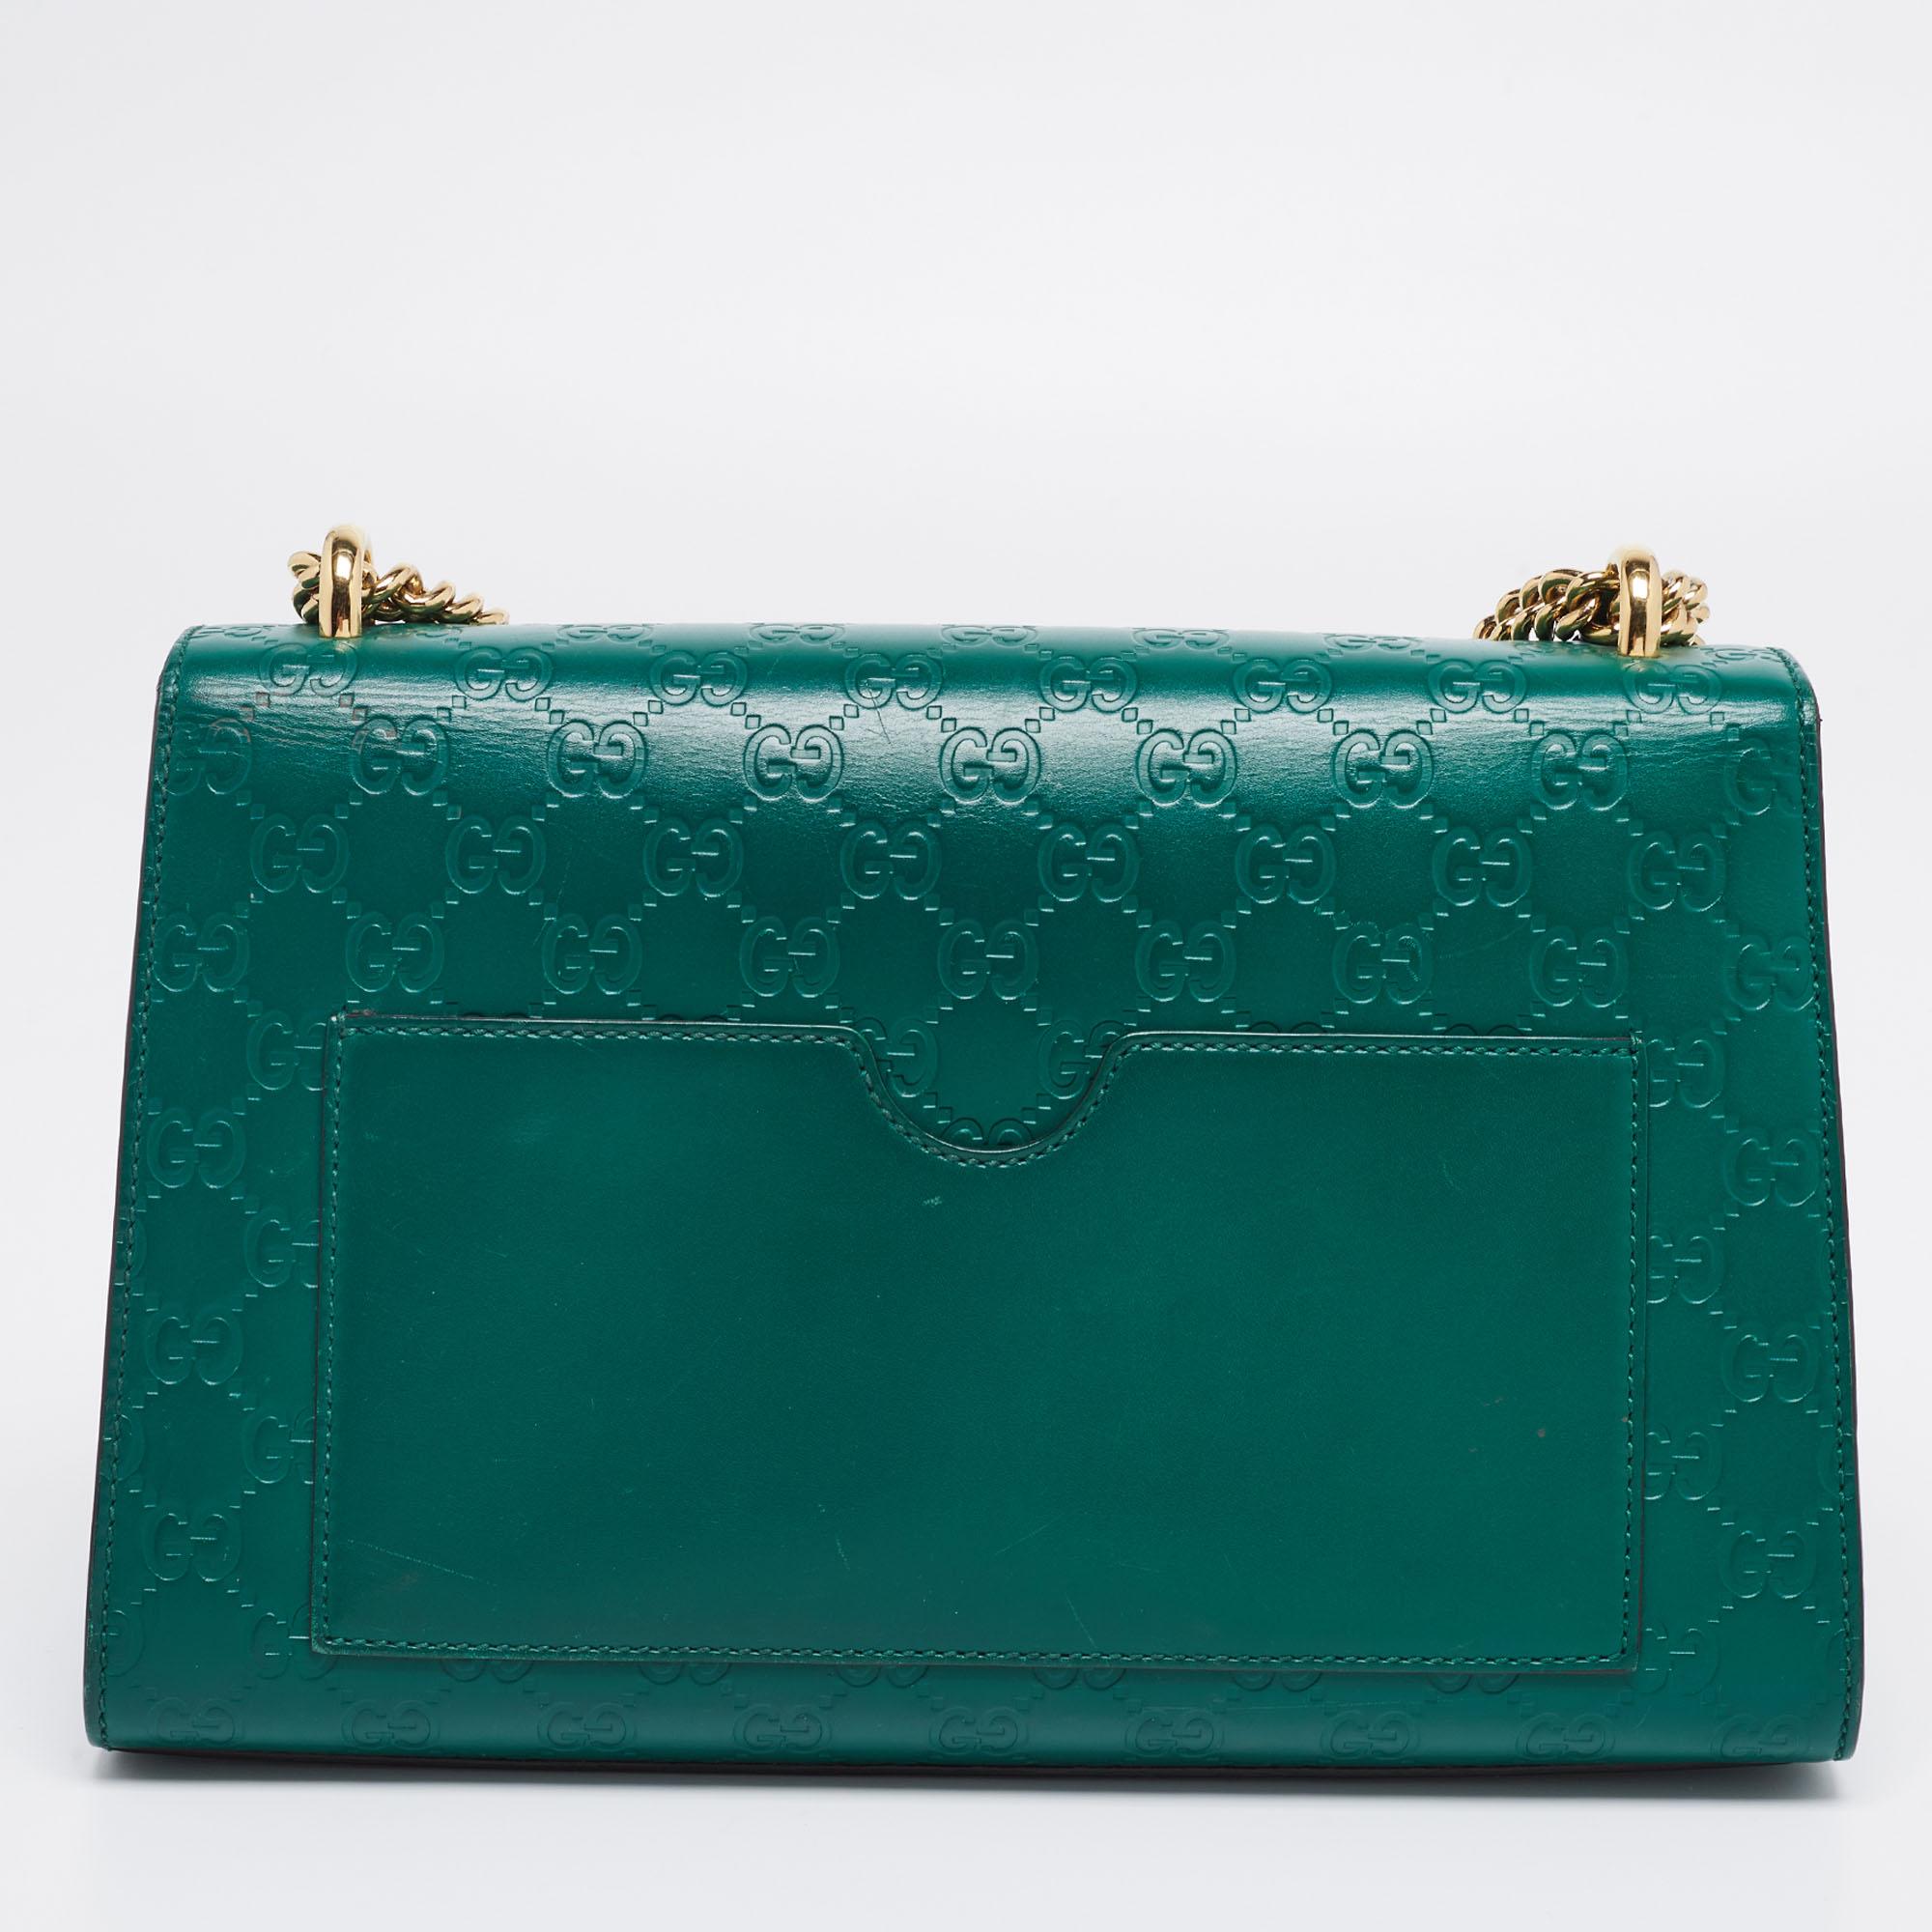 This chic and contemporary bag from Gucci will help you outline a stylish look and outshine everyone else! It comes crafted from the signature Guccissima leather and features a gold-tone padlock on the front flap. It opens to a spacious interior